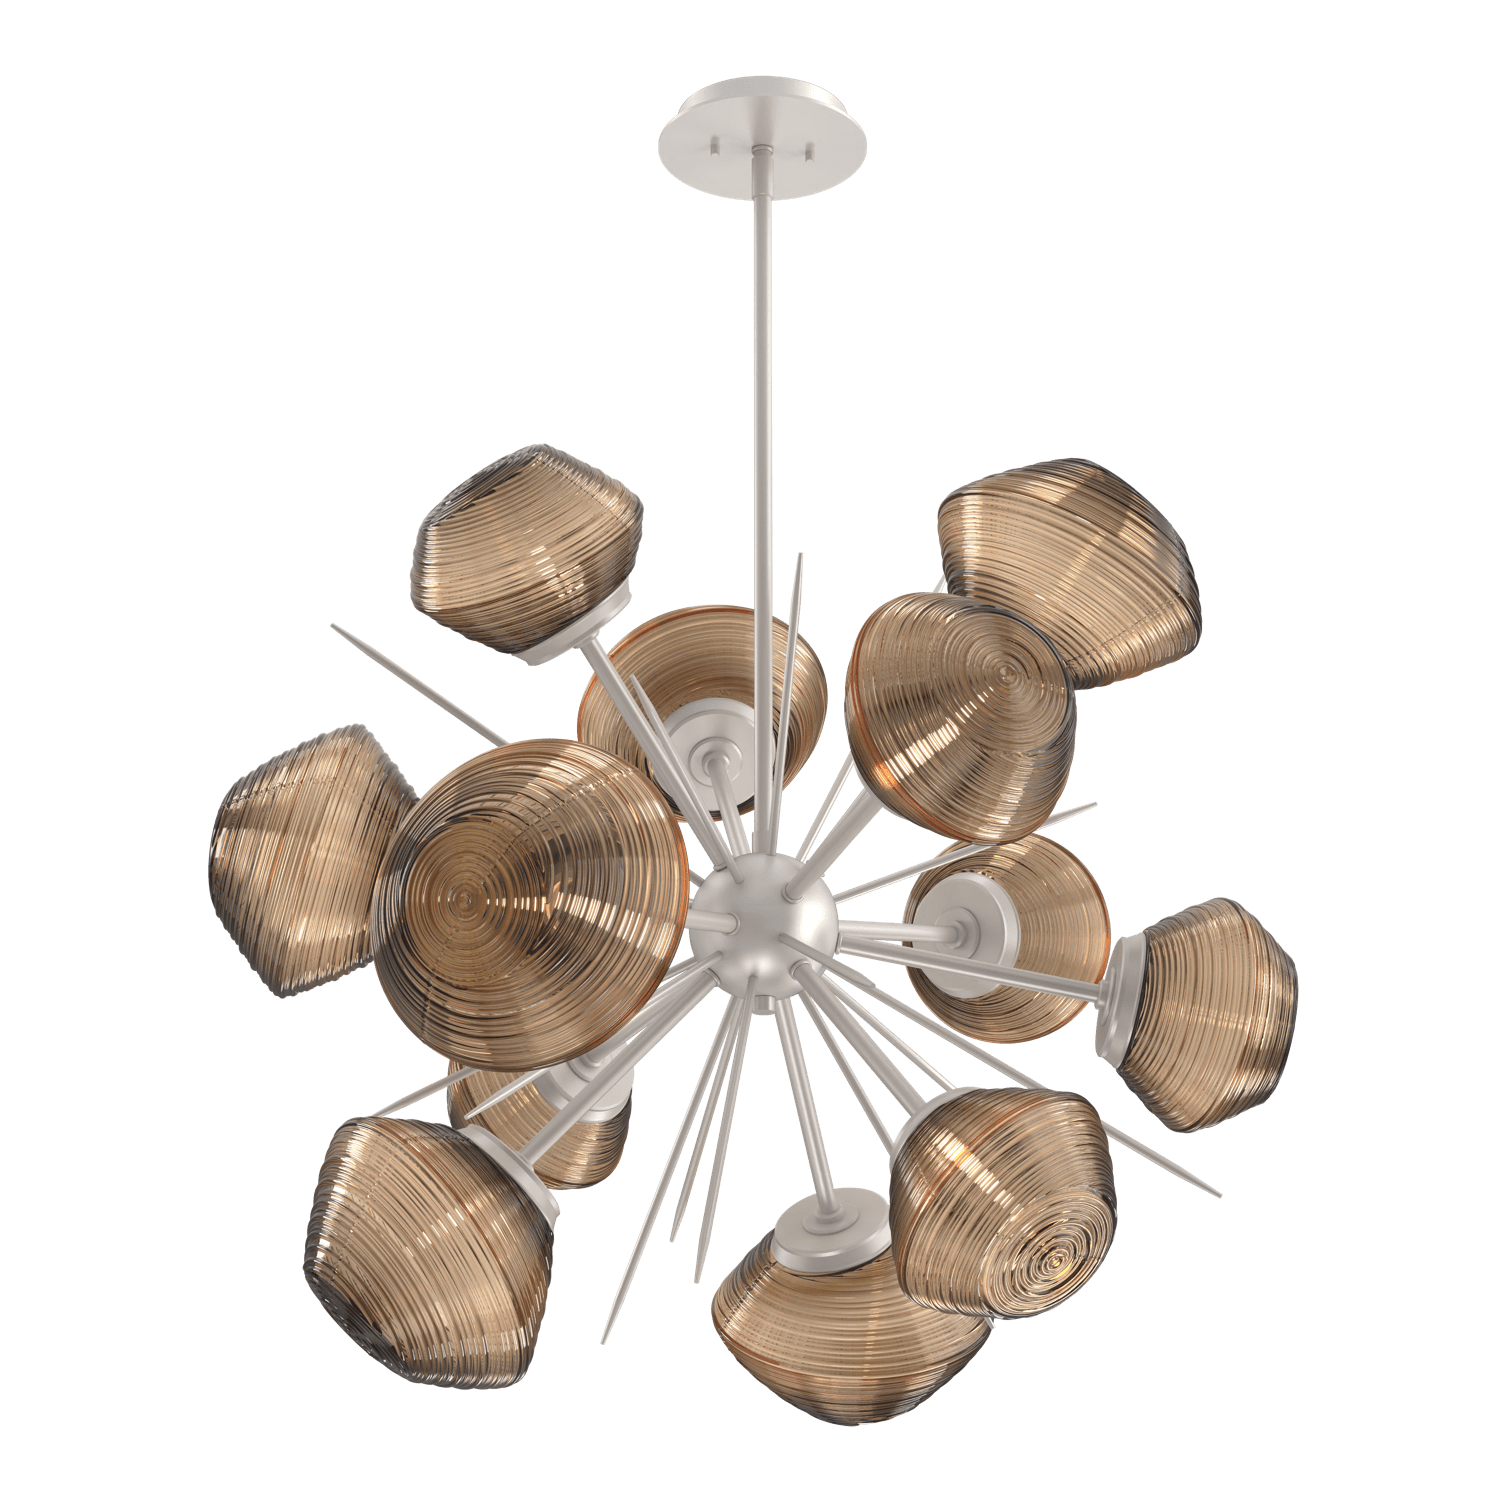 CHB0089-0G-BS-B-Hammerton-Studio-Mesa-36-inch-starburst-chandelier-with-metallic-beige-silver-finish-and-bronze-blown-glass-shades-and-LED-lamping